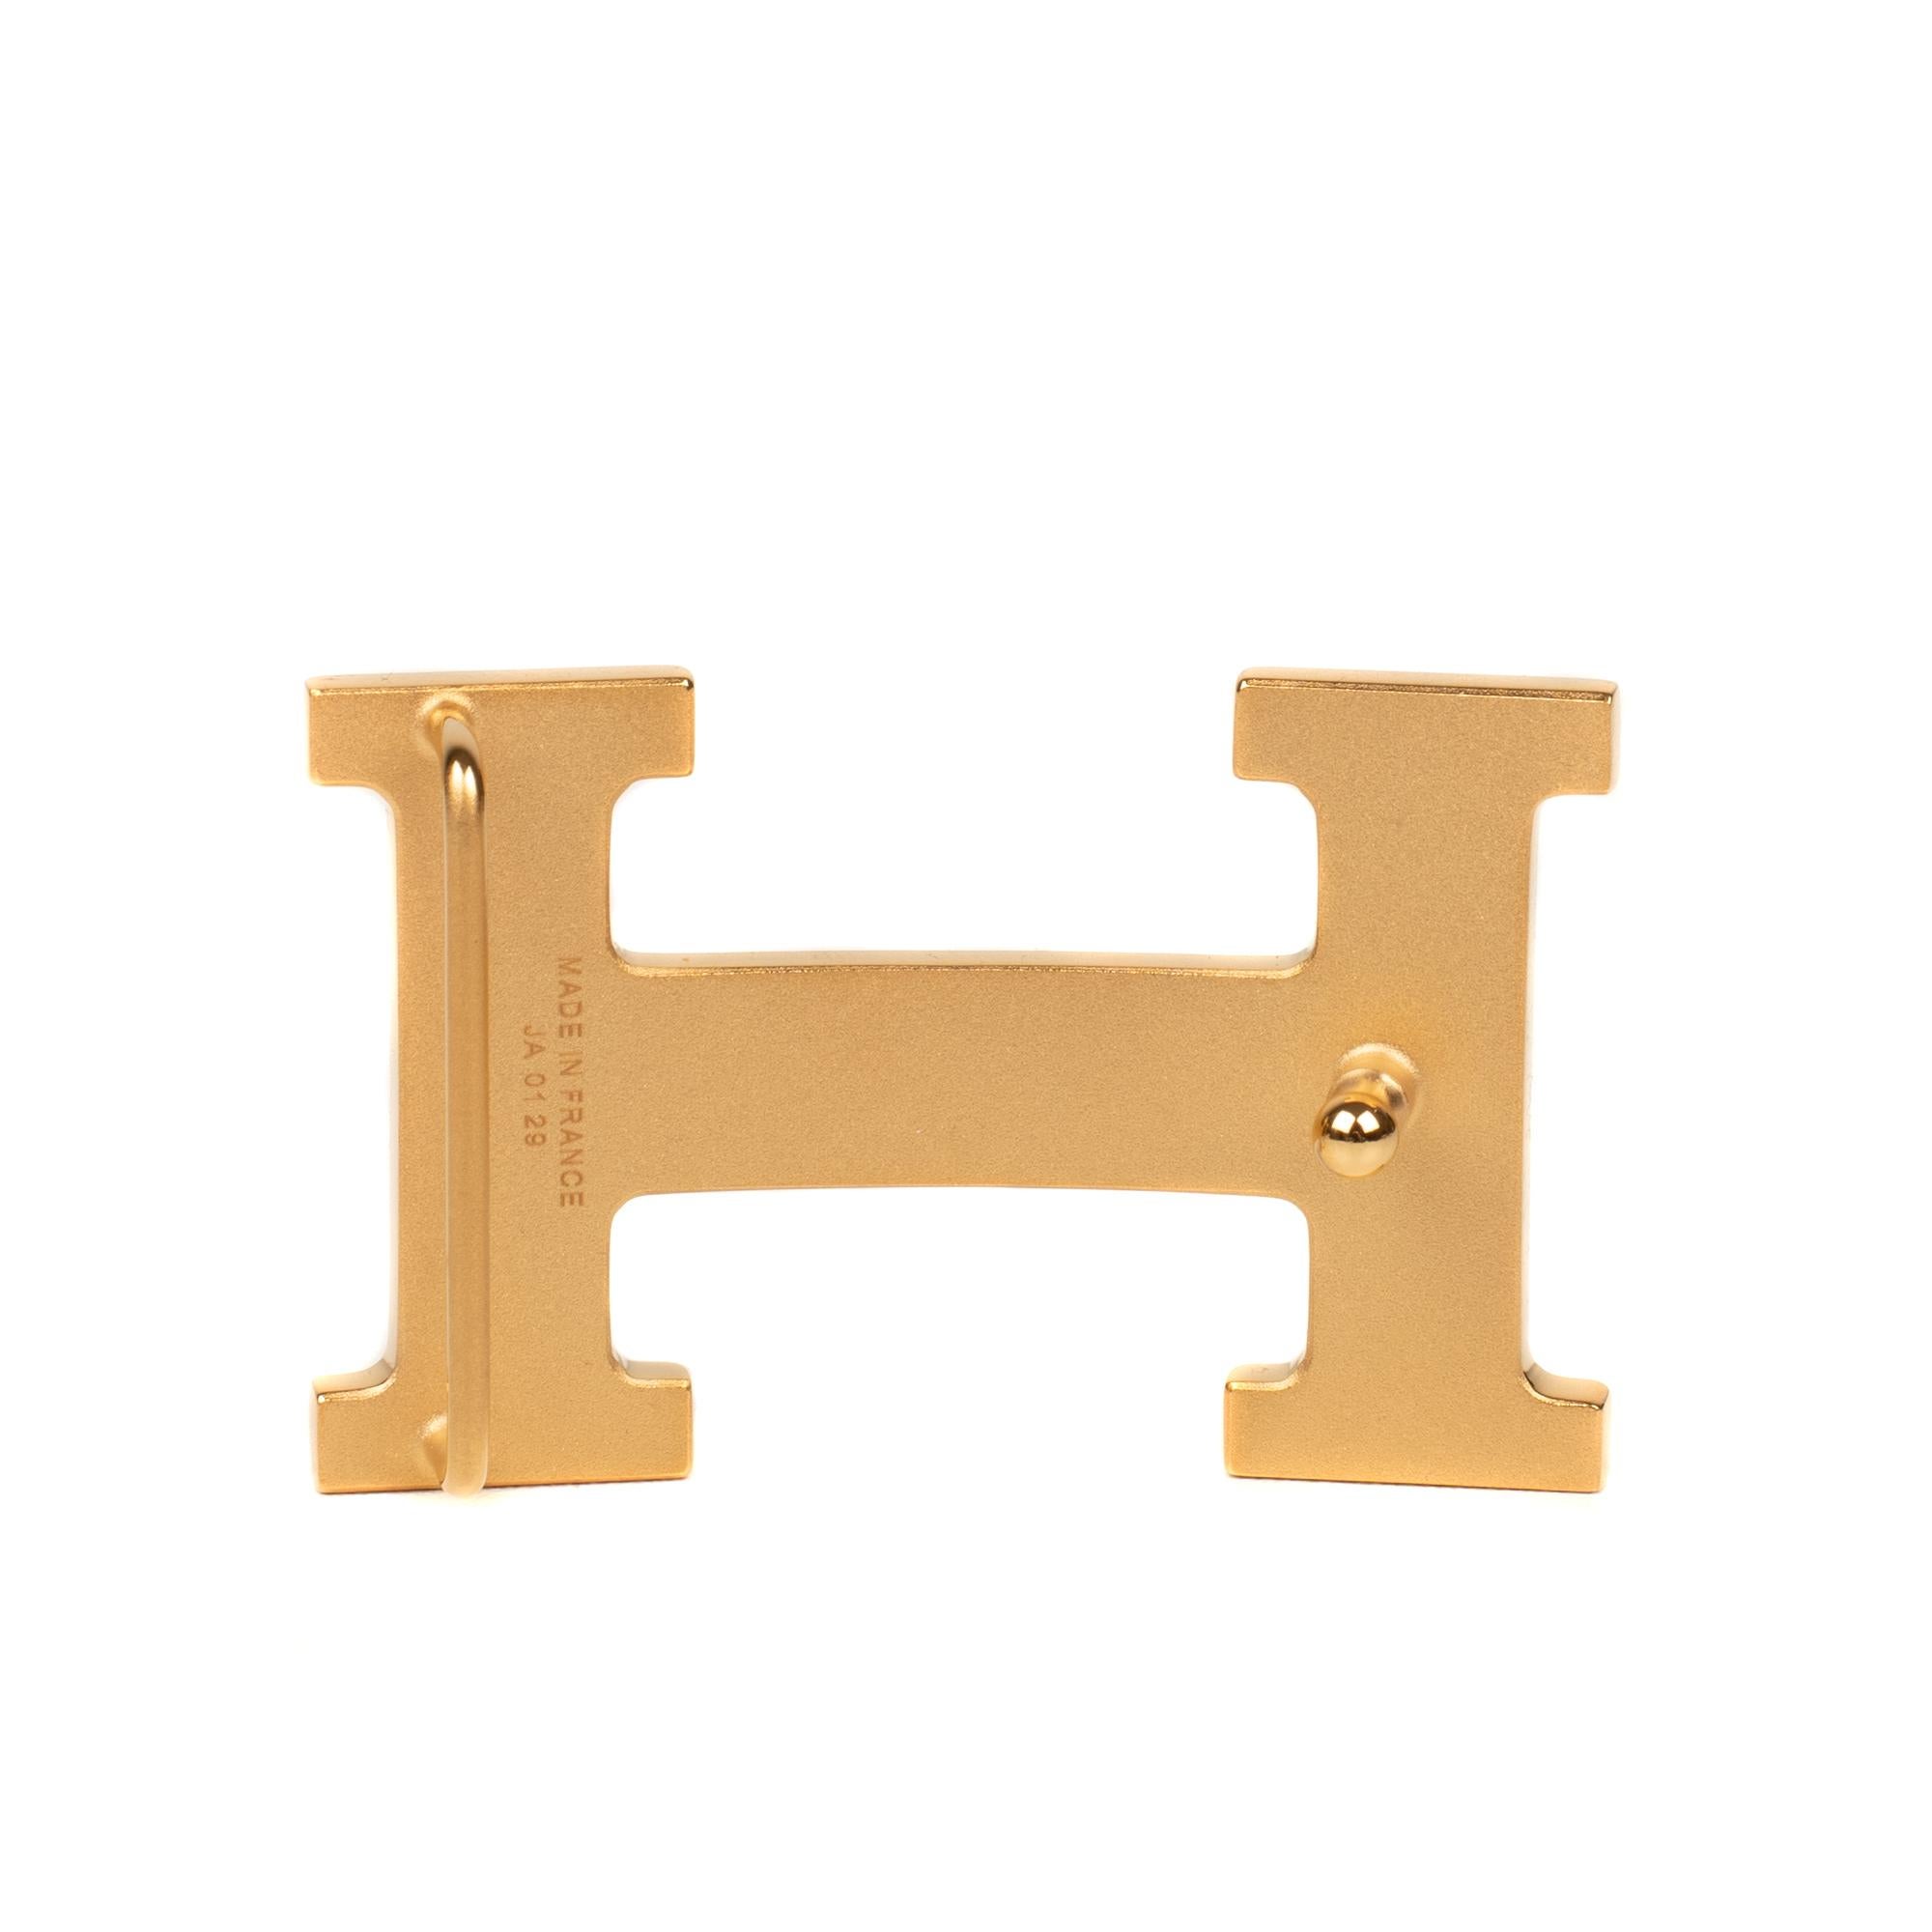 Type: Belt Buckle
Brand: Hermès
Model : Constance
Material : Steel
Color : Shiny Gold
Signature: Hermès
For a leather of 3.2 cm 
Dimensions : H: 3.7 x L: 6 x P: 1.4 cm
Pristine Condition- Sold with dustbag.